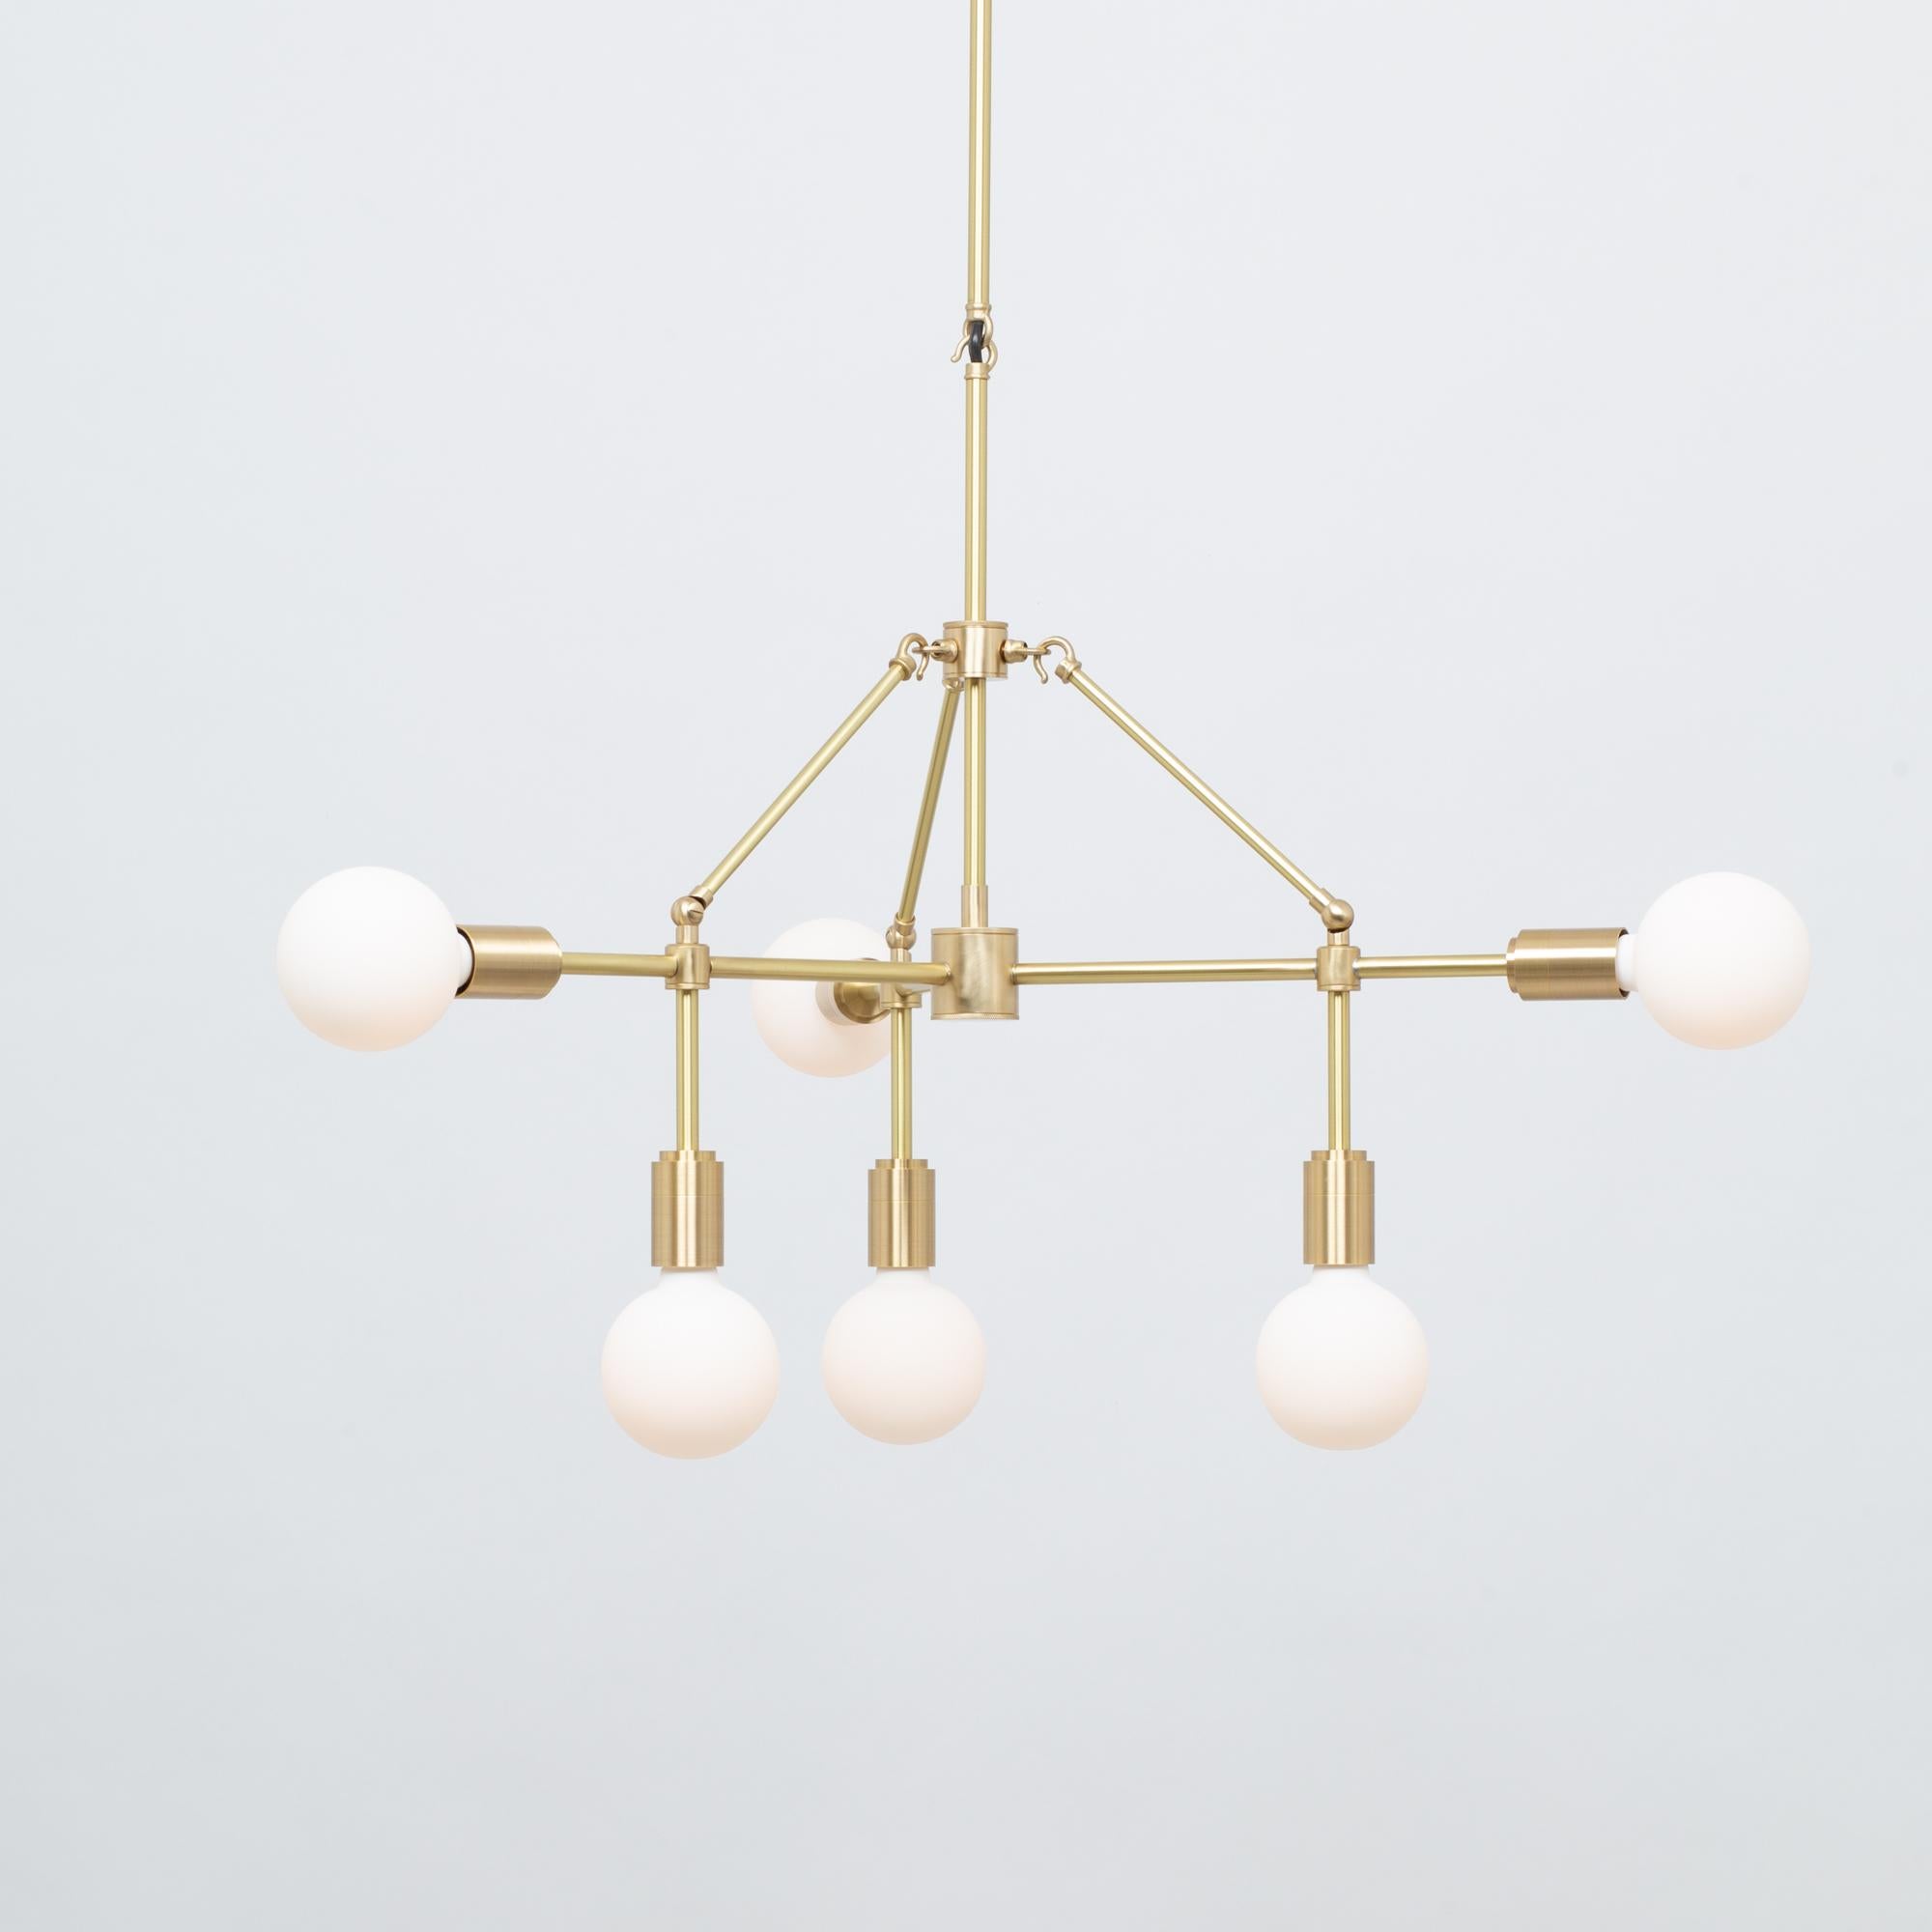 Six Sphere Chandelier 
Solid Brass, Satin Finished, Lacquered 
Six Tala Sphere III Dim to Warm Bulbs.
2000K - 2800K  95CRI
3600 Dim to Warm Lumens 
Sphere III bulbs included
Medium ø85cm Chandelier Inc Bulb 
Handmade in Hackney Wick by Lights of